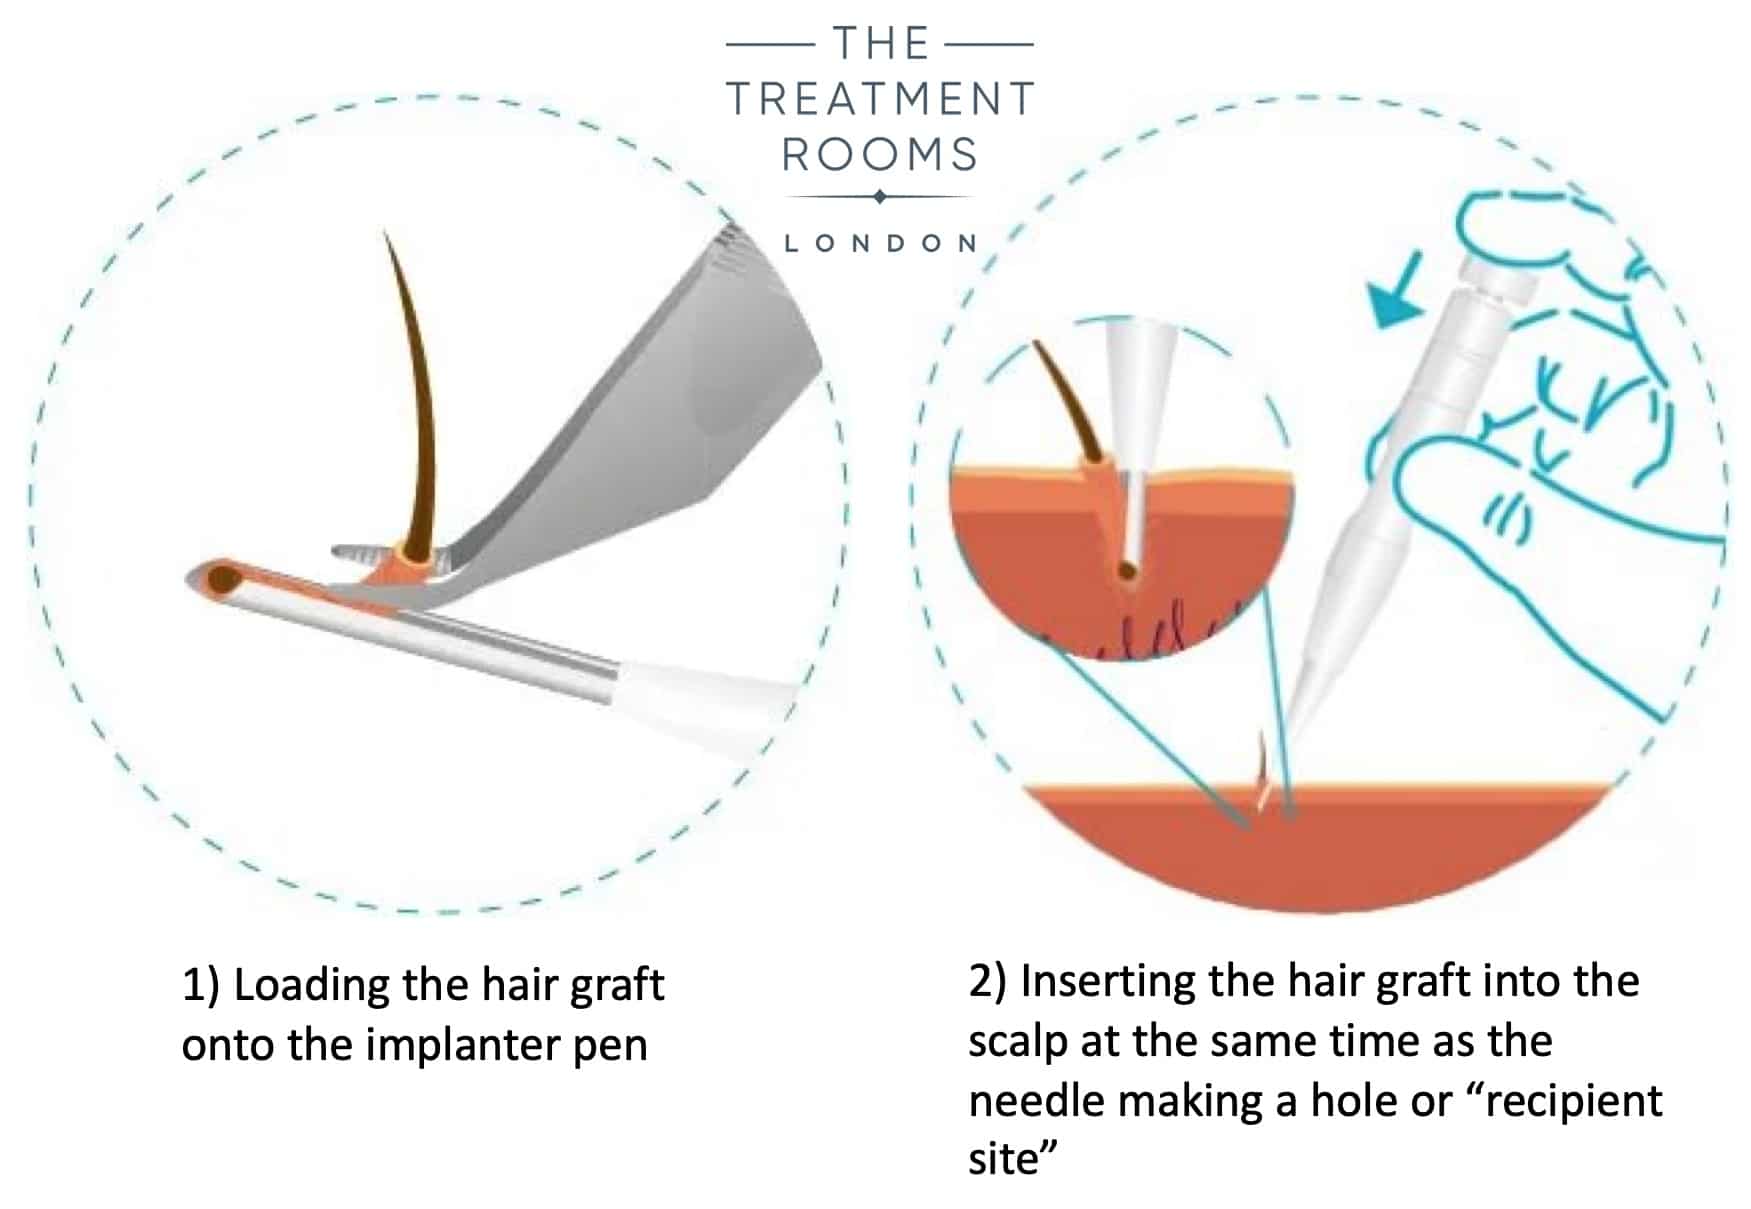 Direct Hair Implantation | The Treatment Rooms London